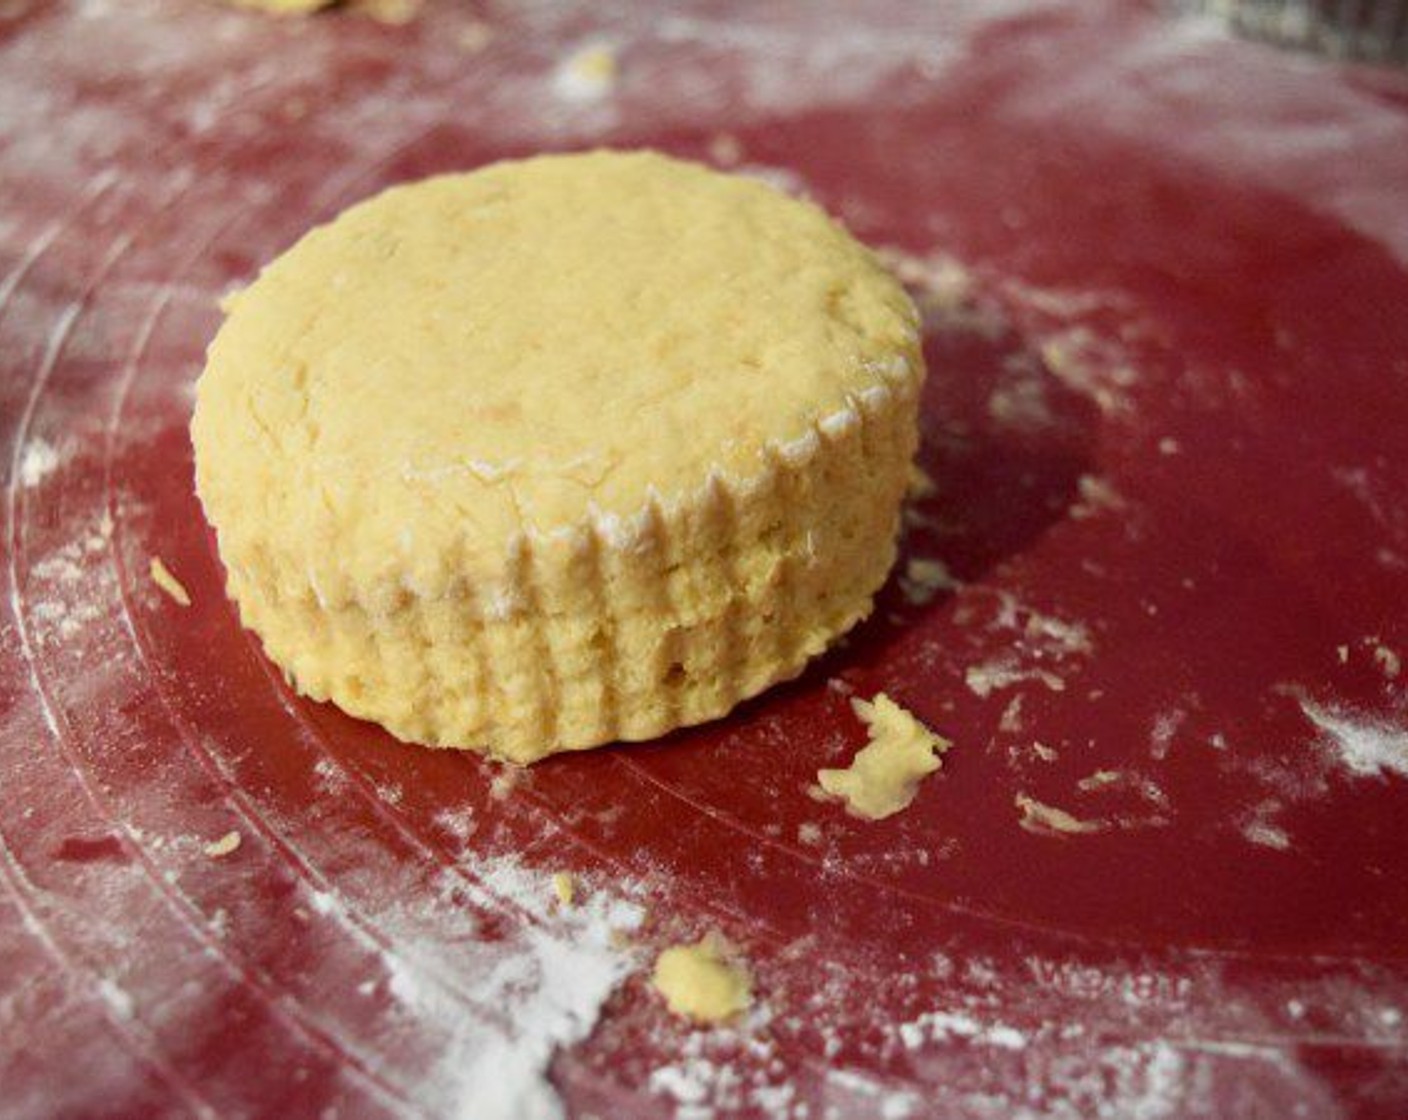 step 10 Place the biscuits in a buttered cake pan and keep the biscuits close to each other. Place the cake pan in the fridge/freezer and let the biscuits chill for 5-10 minutes. Then brush the biscuits with a 1 tablespoon of melted butter.